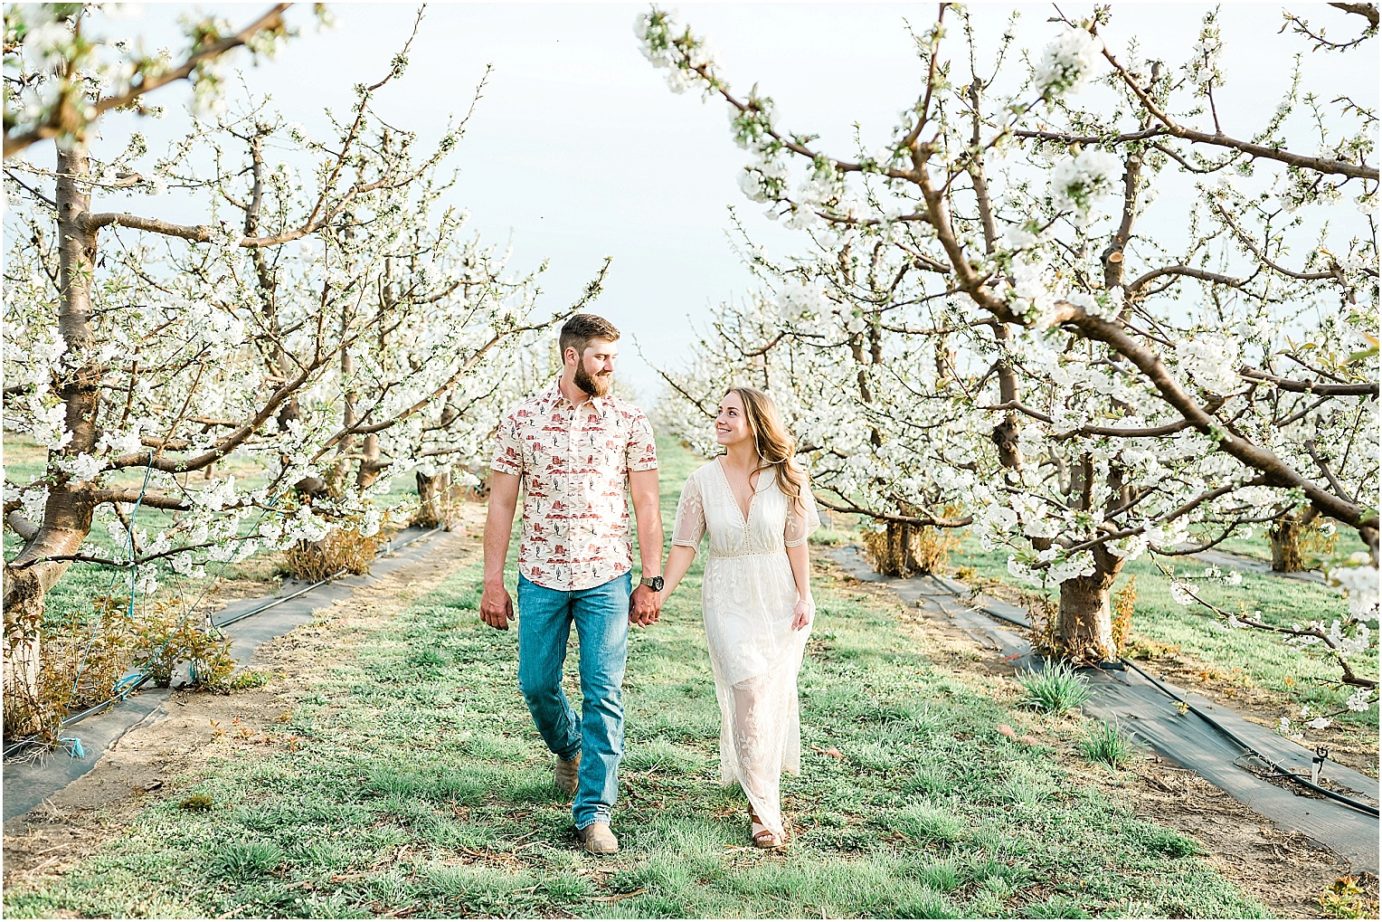 eastern washington engagement session PNW photographer Travis and arianna kissing around cherry blossoms